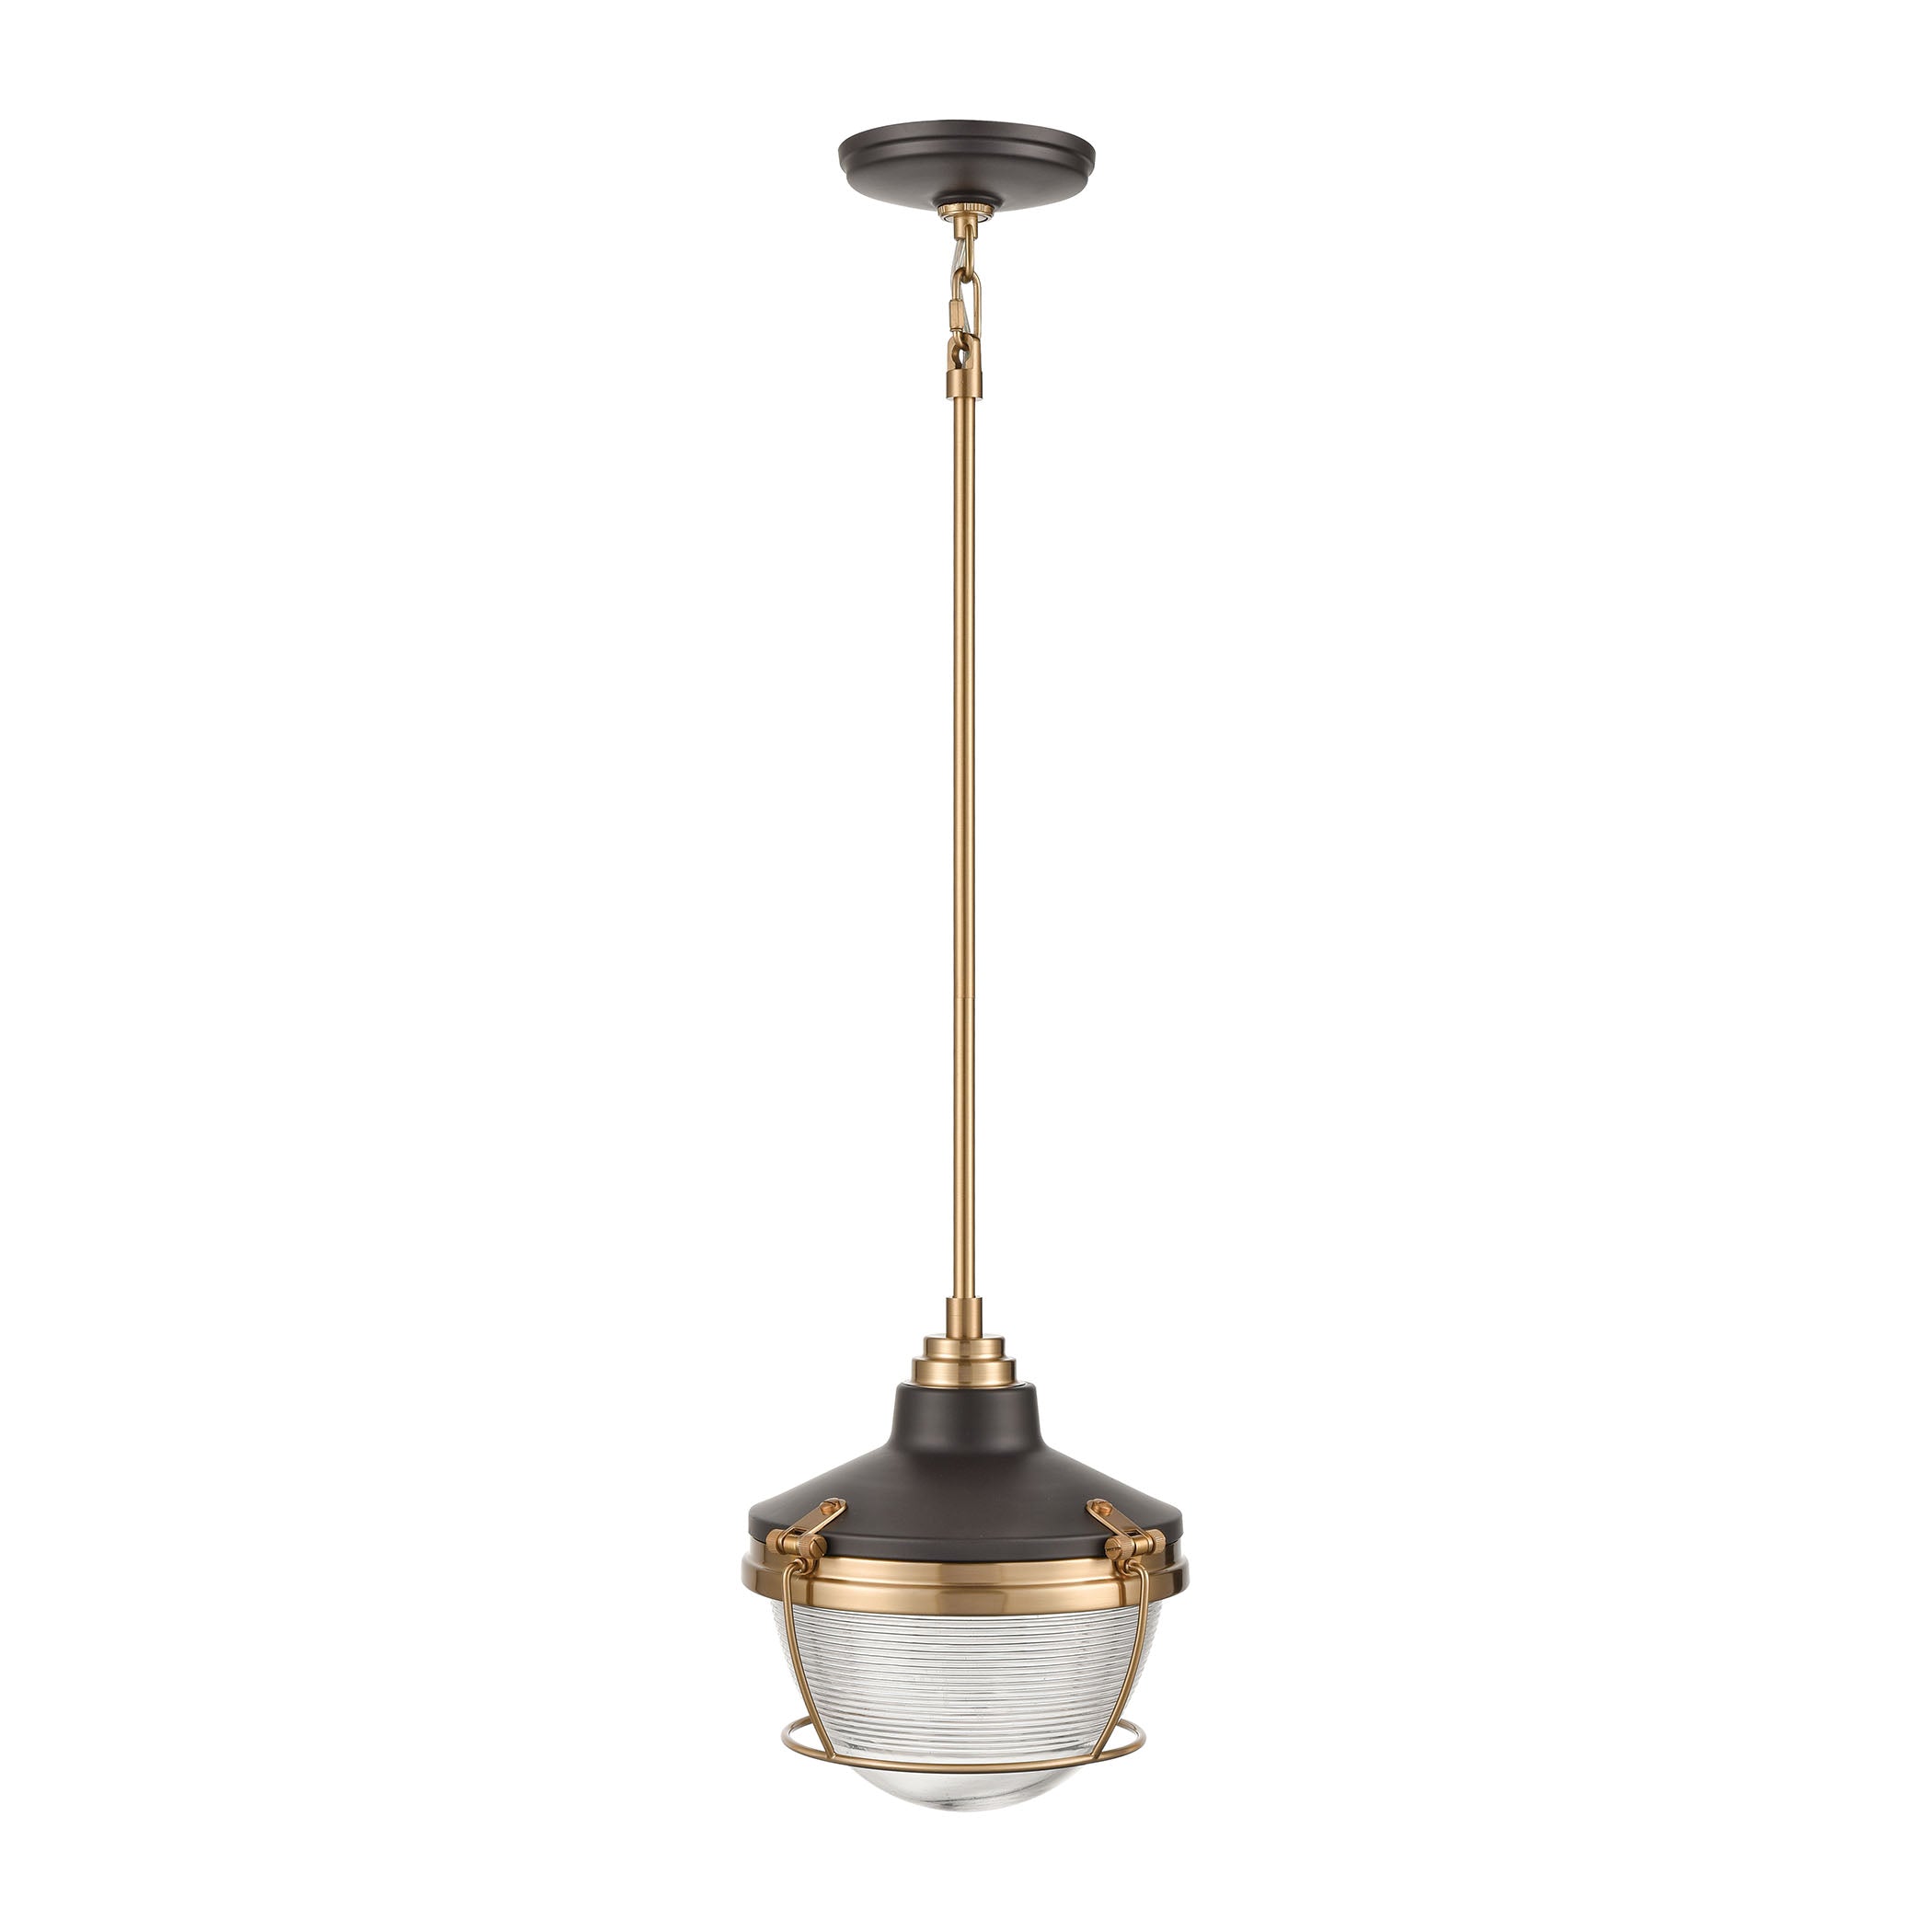 ELK Lighting 16535/1 Seaway Passage 1-Light Mini Pendant in Oil Rubbed Bronze and Satin Brass with Clear Ribbed Glass